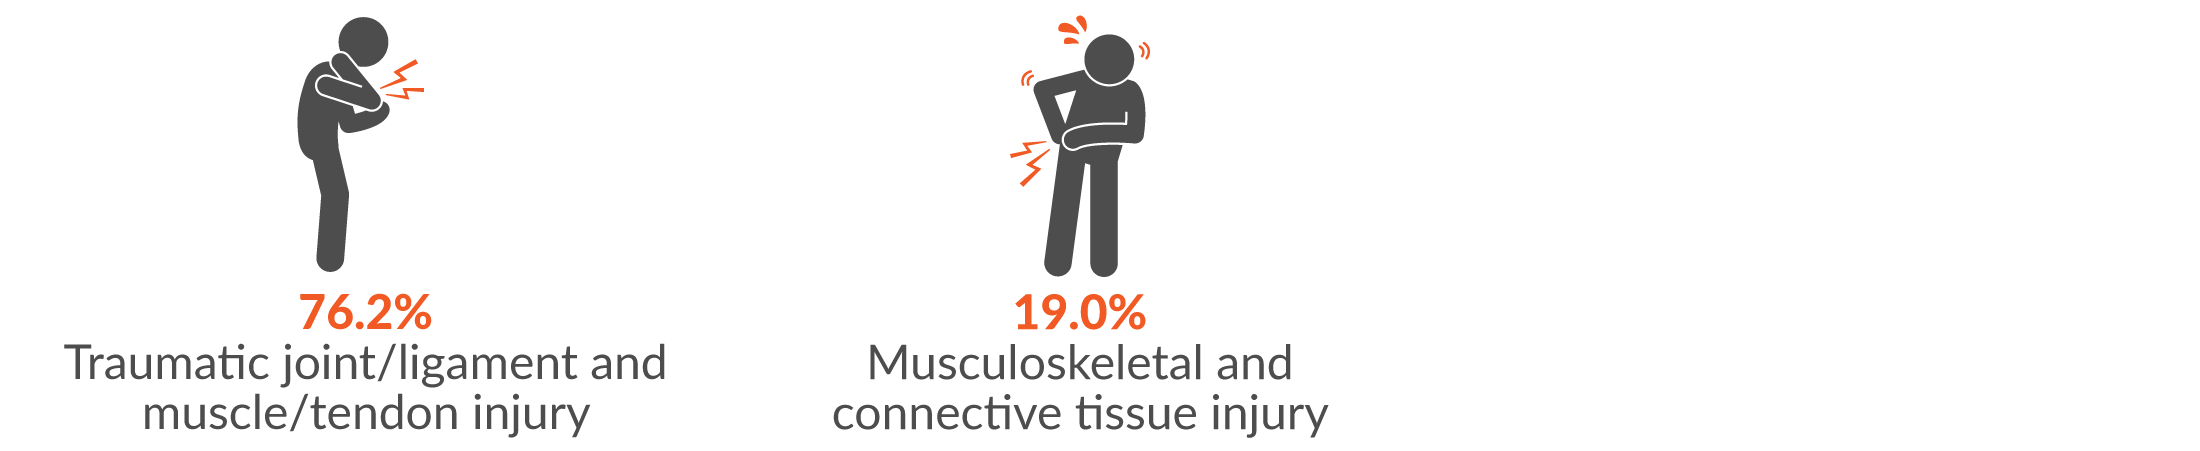 This infographic shows the main two injury groups resulting from body stressing were 76.2% traumatic joint/ligament and muscle/tendon injury; and 19% musculoskeletal and connective tissue injury.